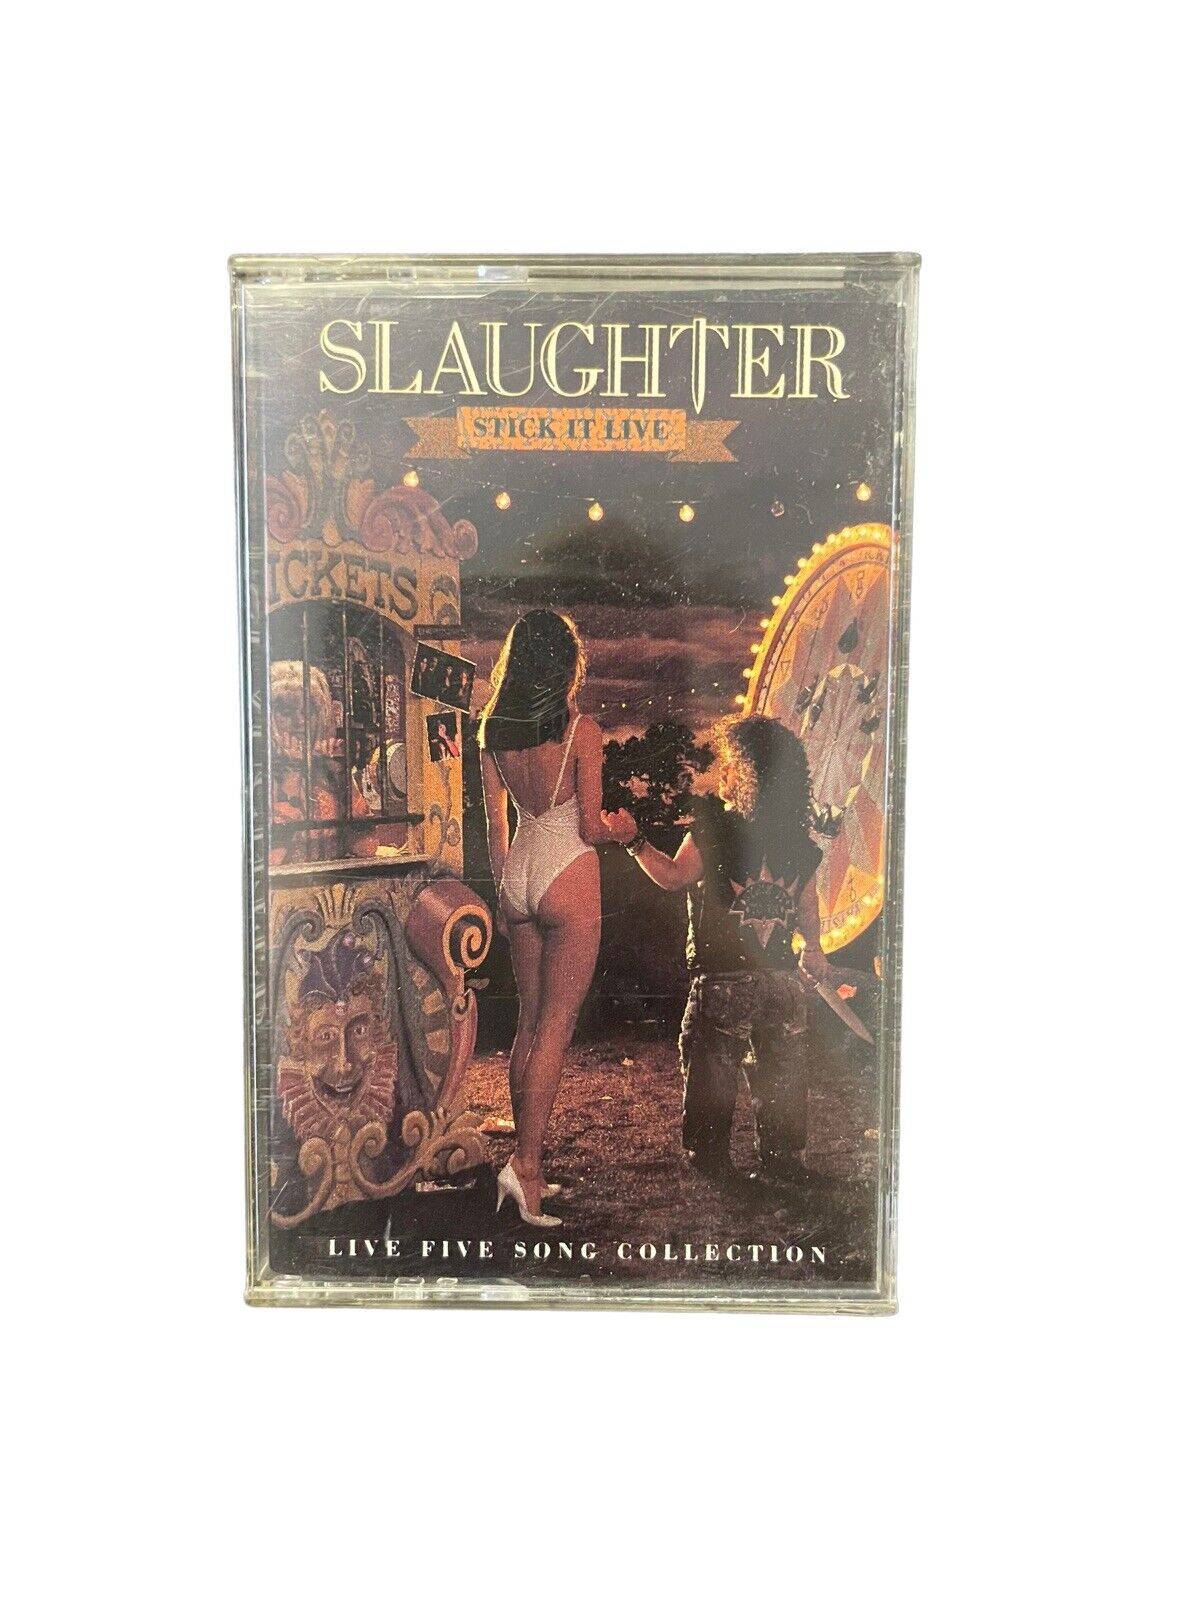 Slaughter Stick It Live 1990 Cassette Tape Chrysalis Records 5 Song Collection